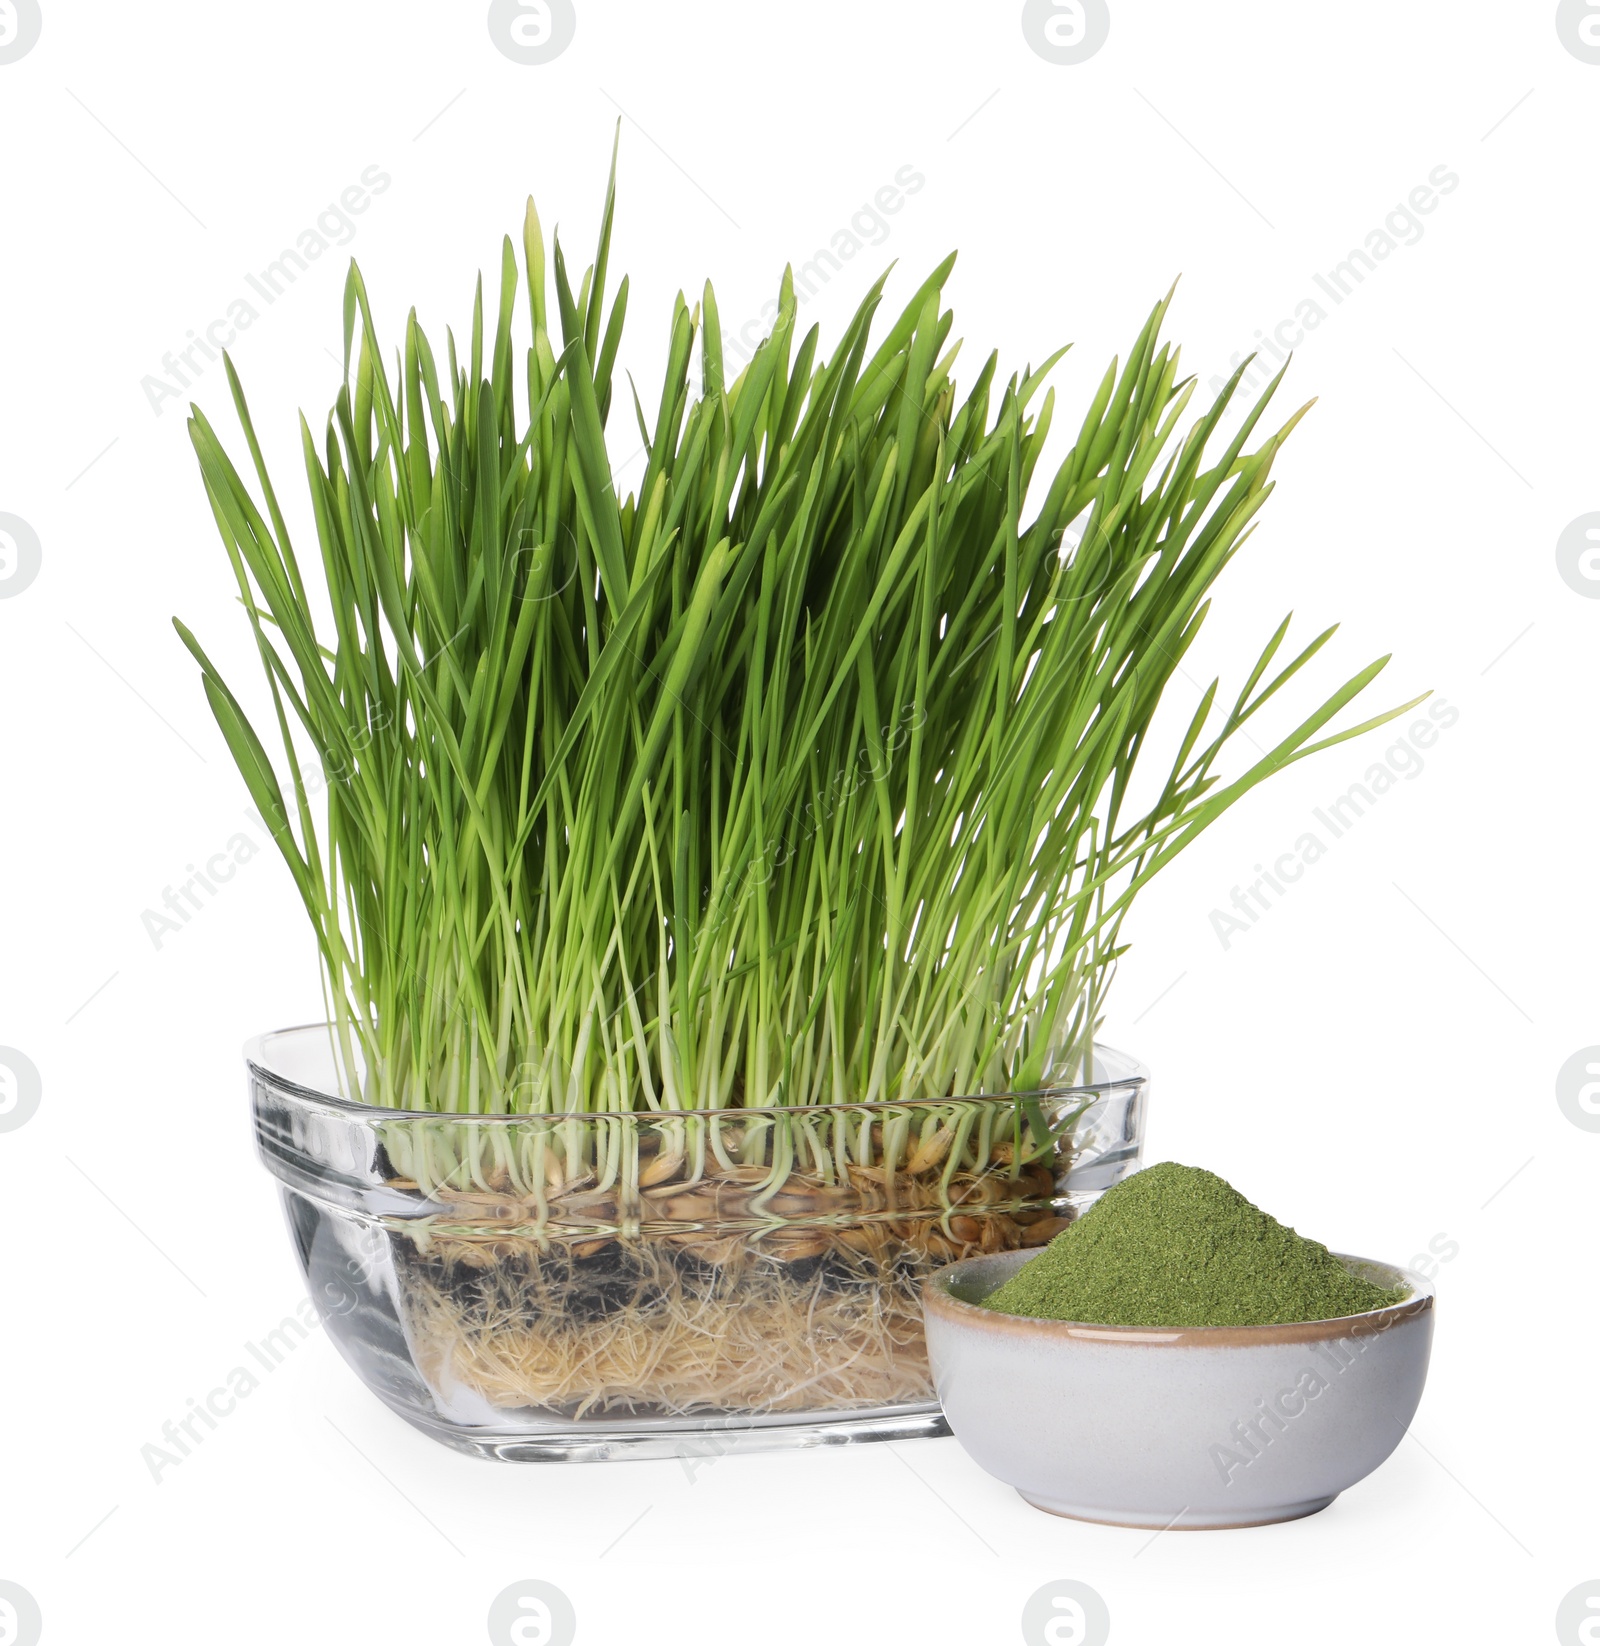 Photo of Potted fresh wheat grass and green powder in bowl isolated on white